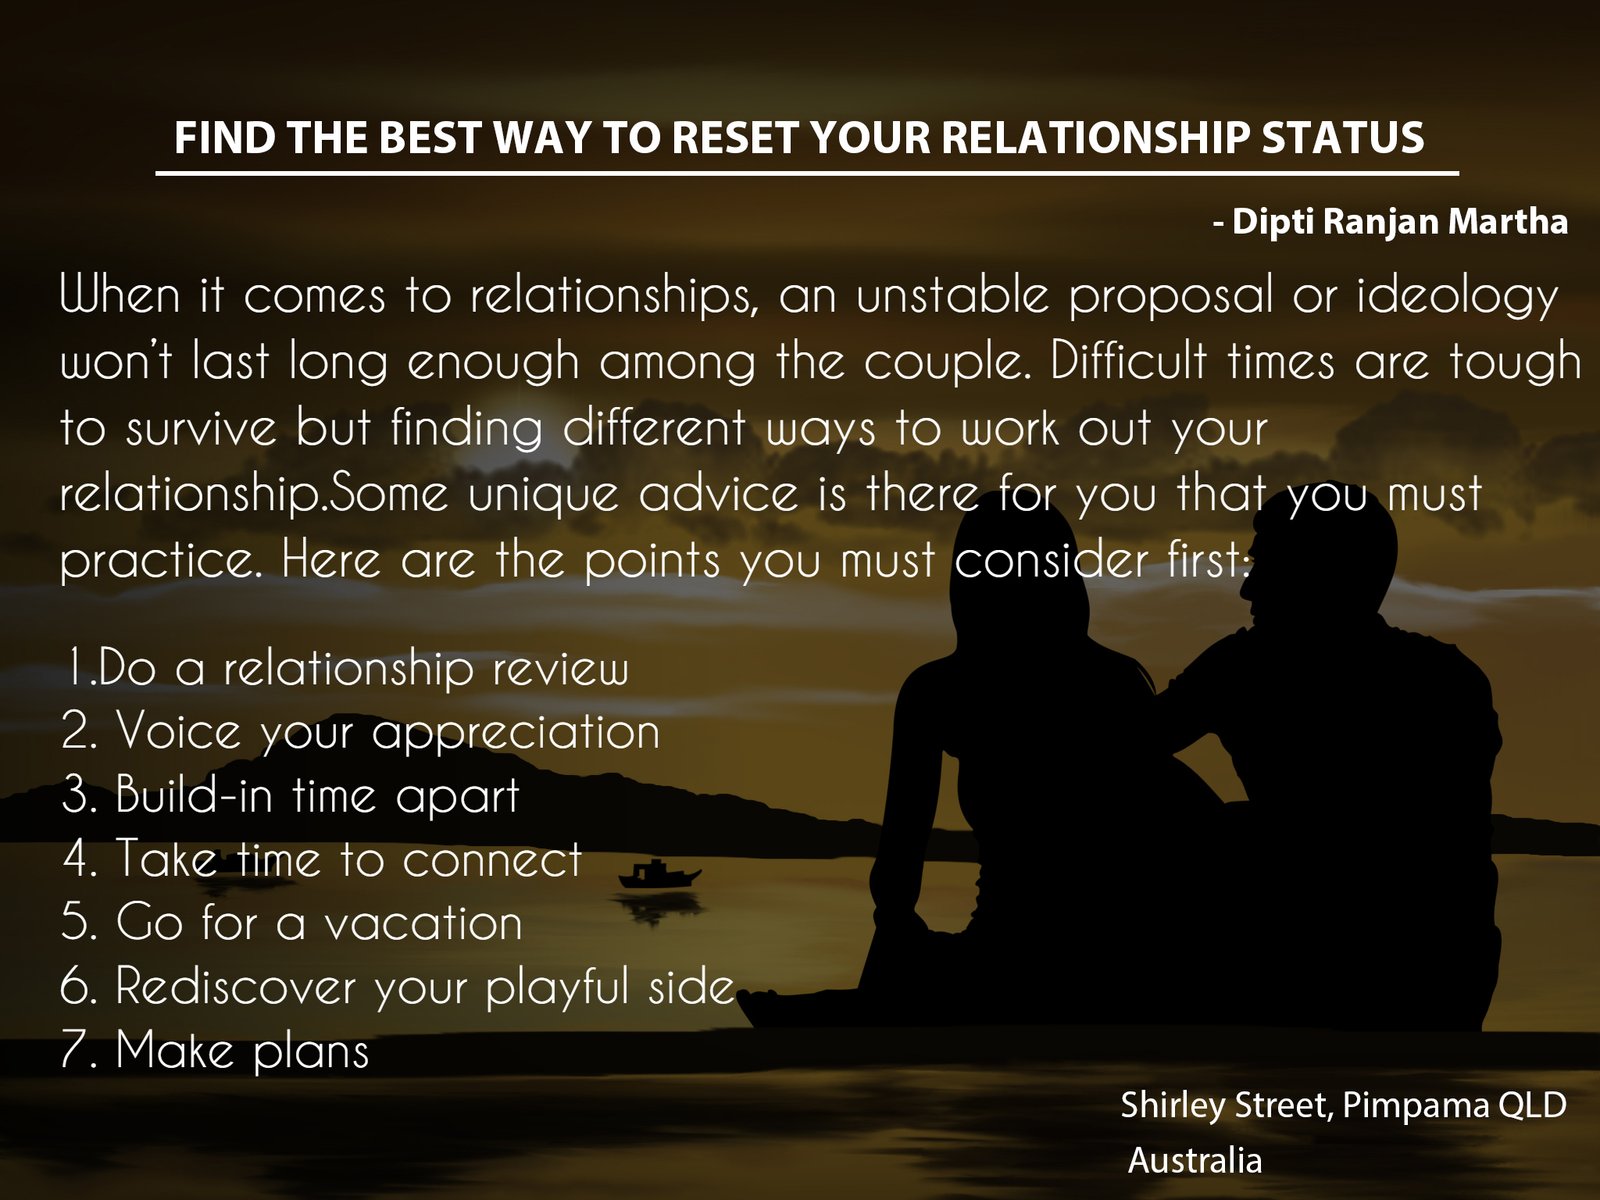 Find the Best Way to Reset Your Relationship Status